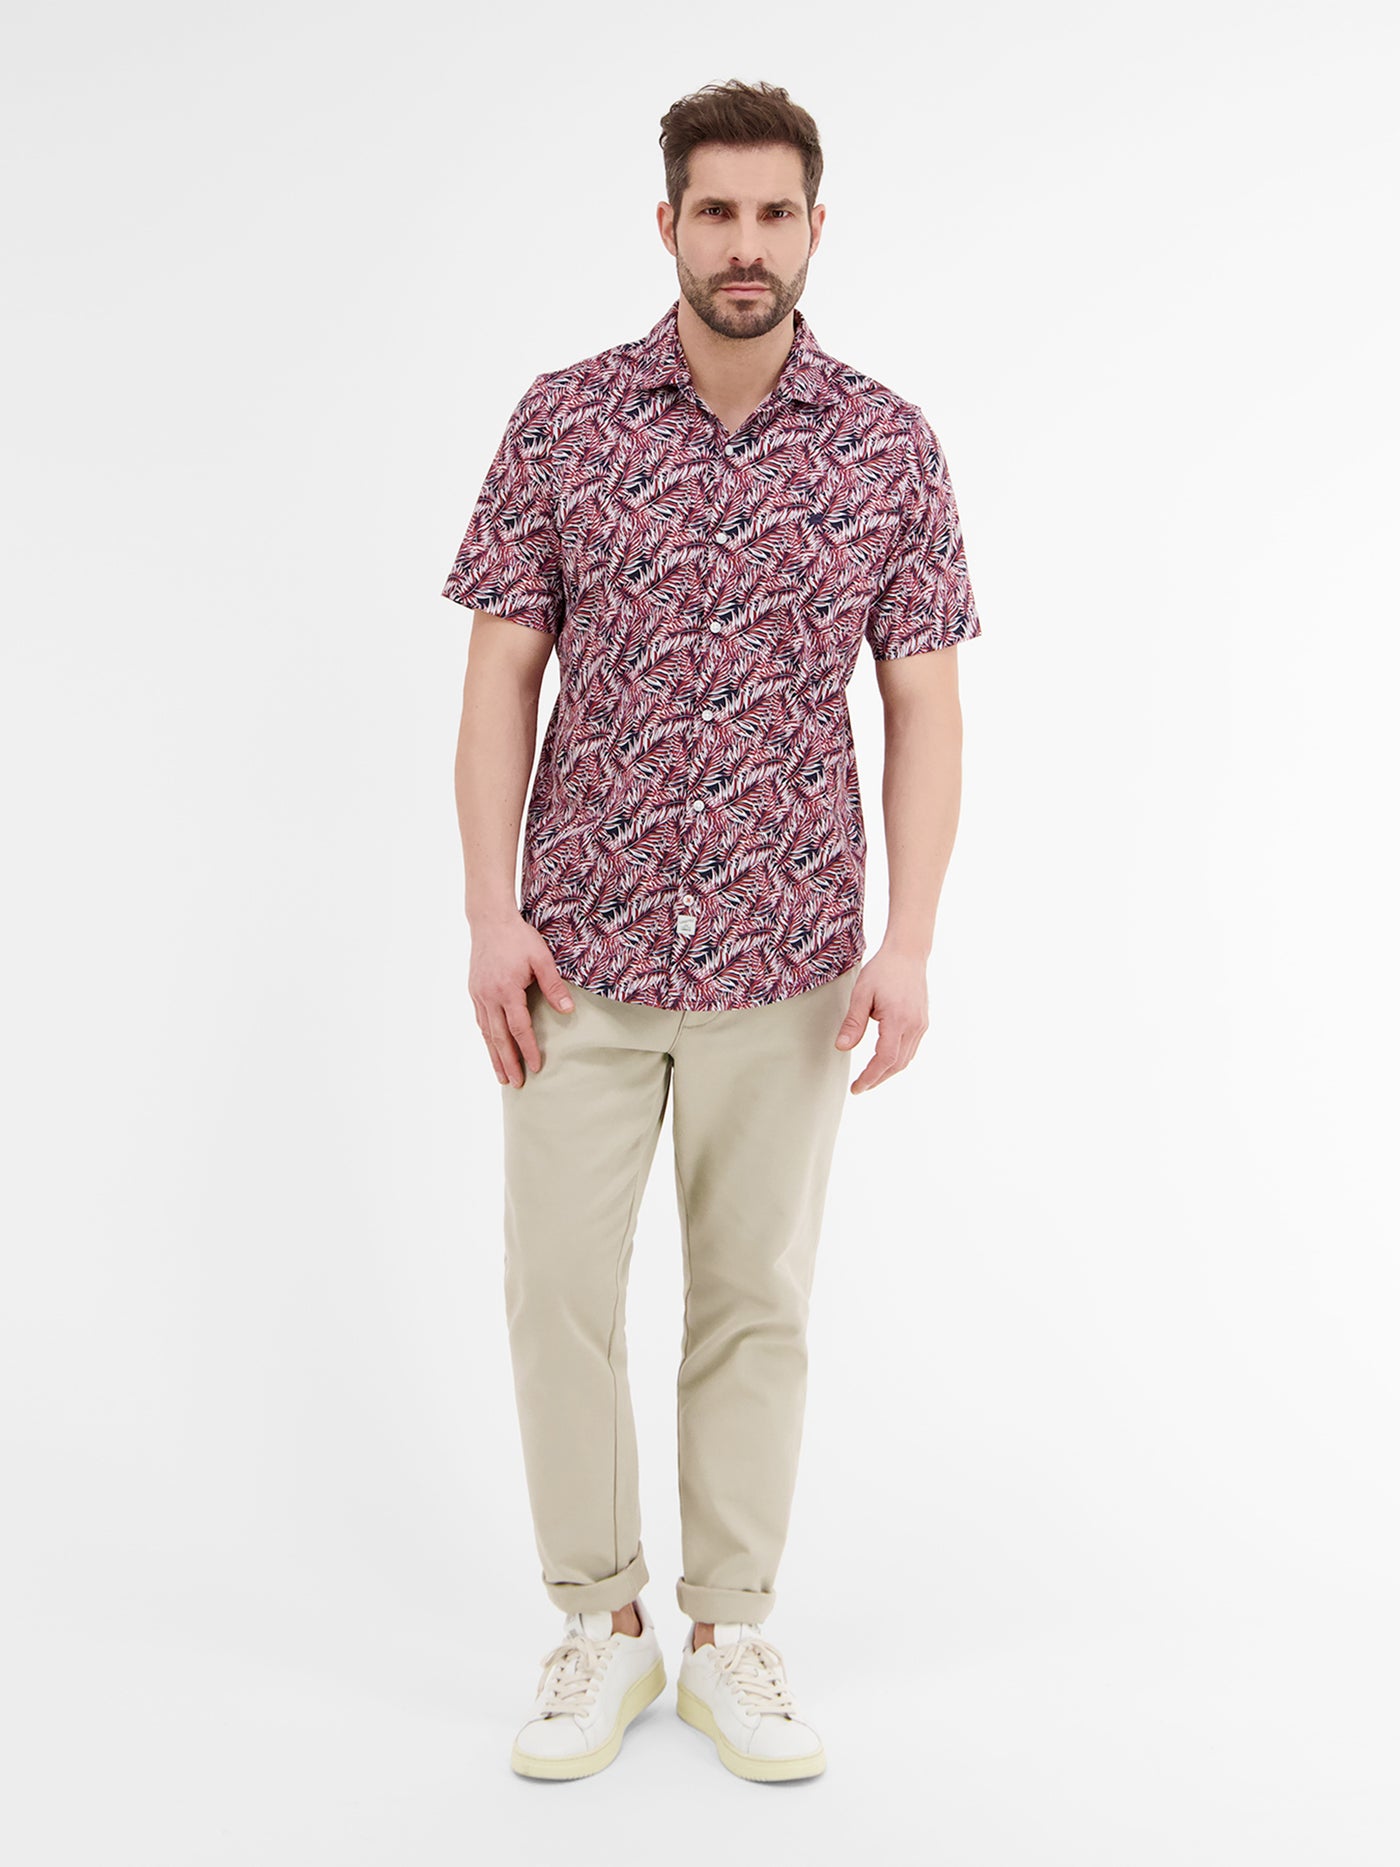 Summery short-sleeved shirt with a floral print